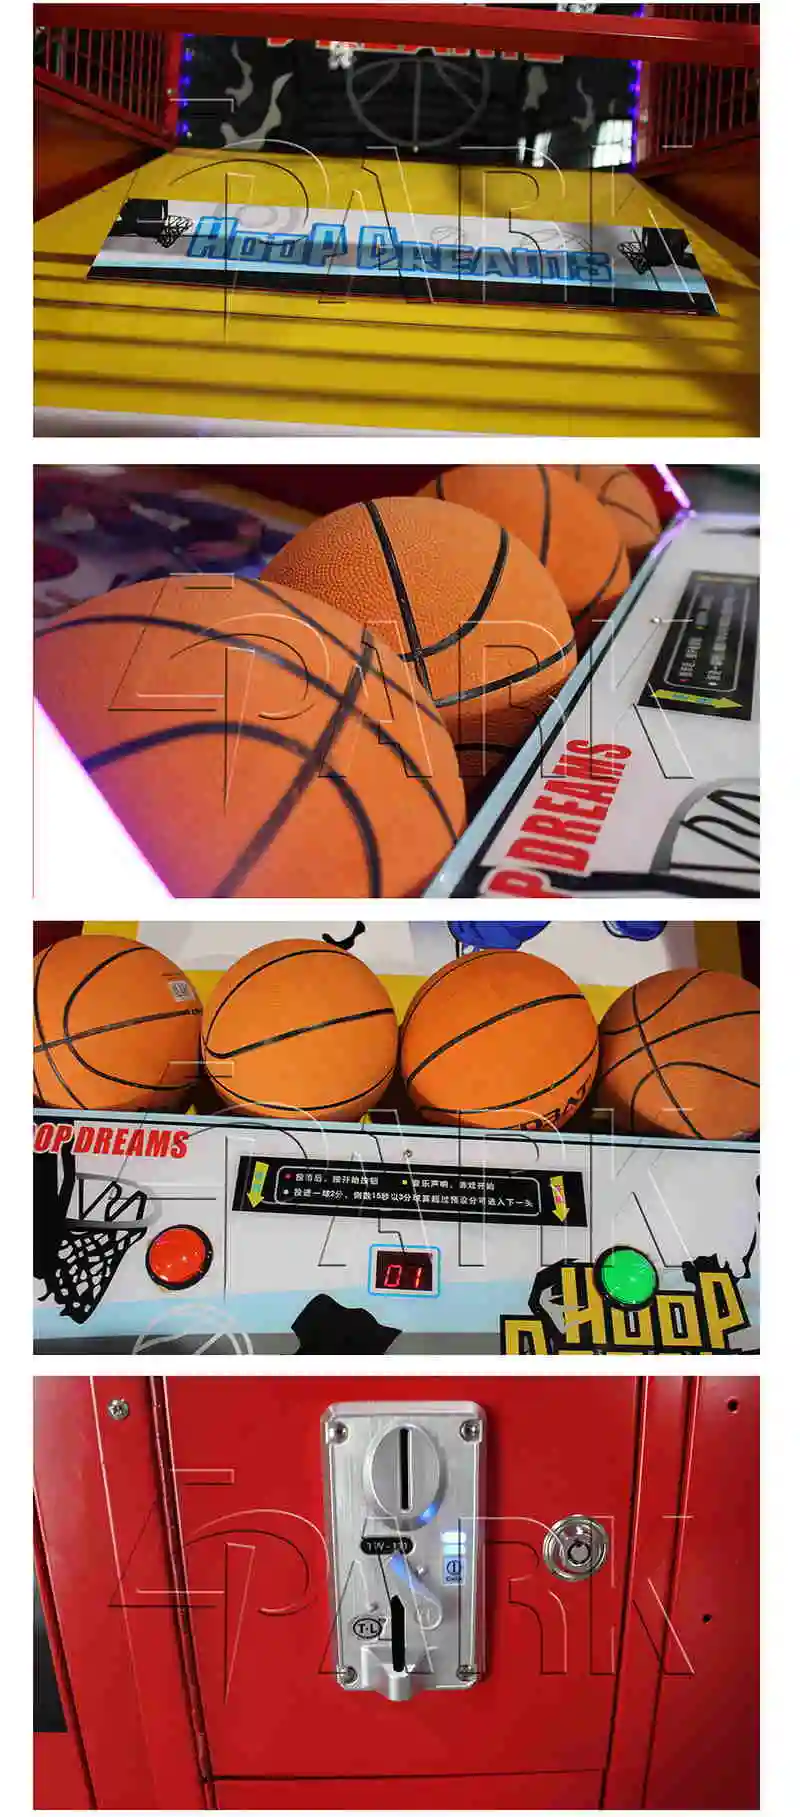 Physical Fitness Basketball Machine Named Hoop Dreams Coin Amusement Game Machine